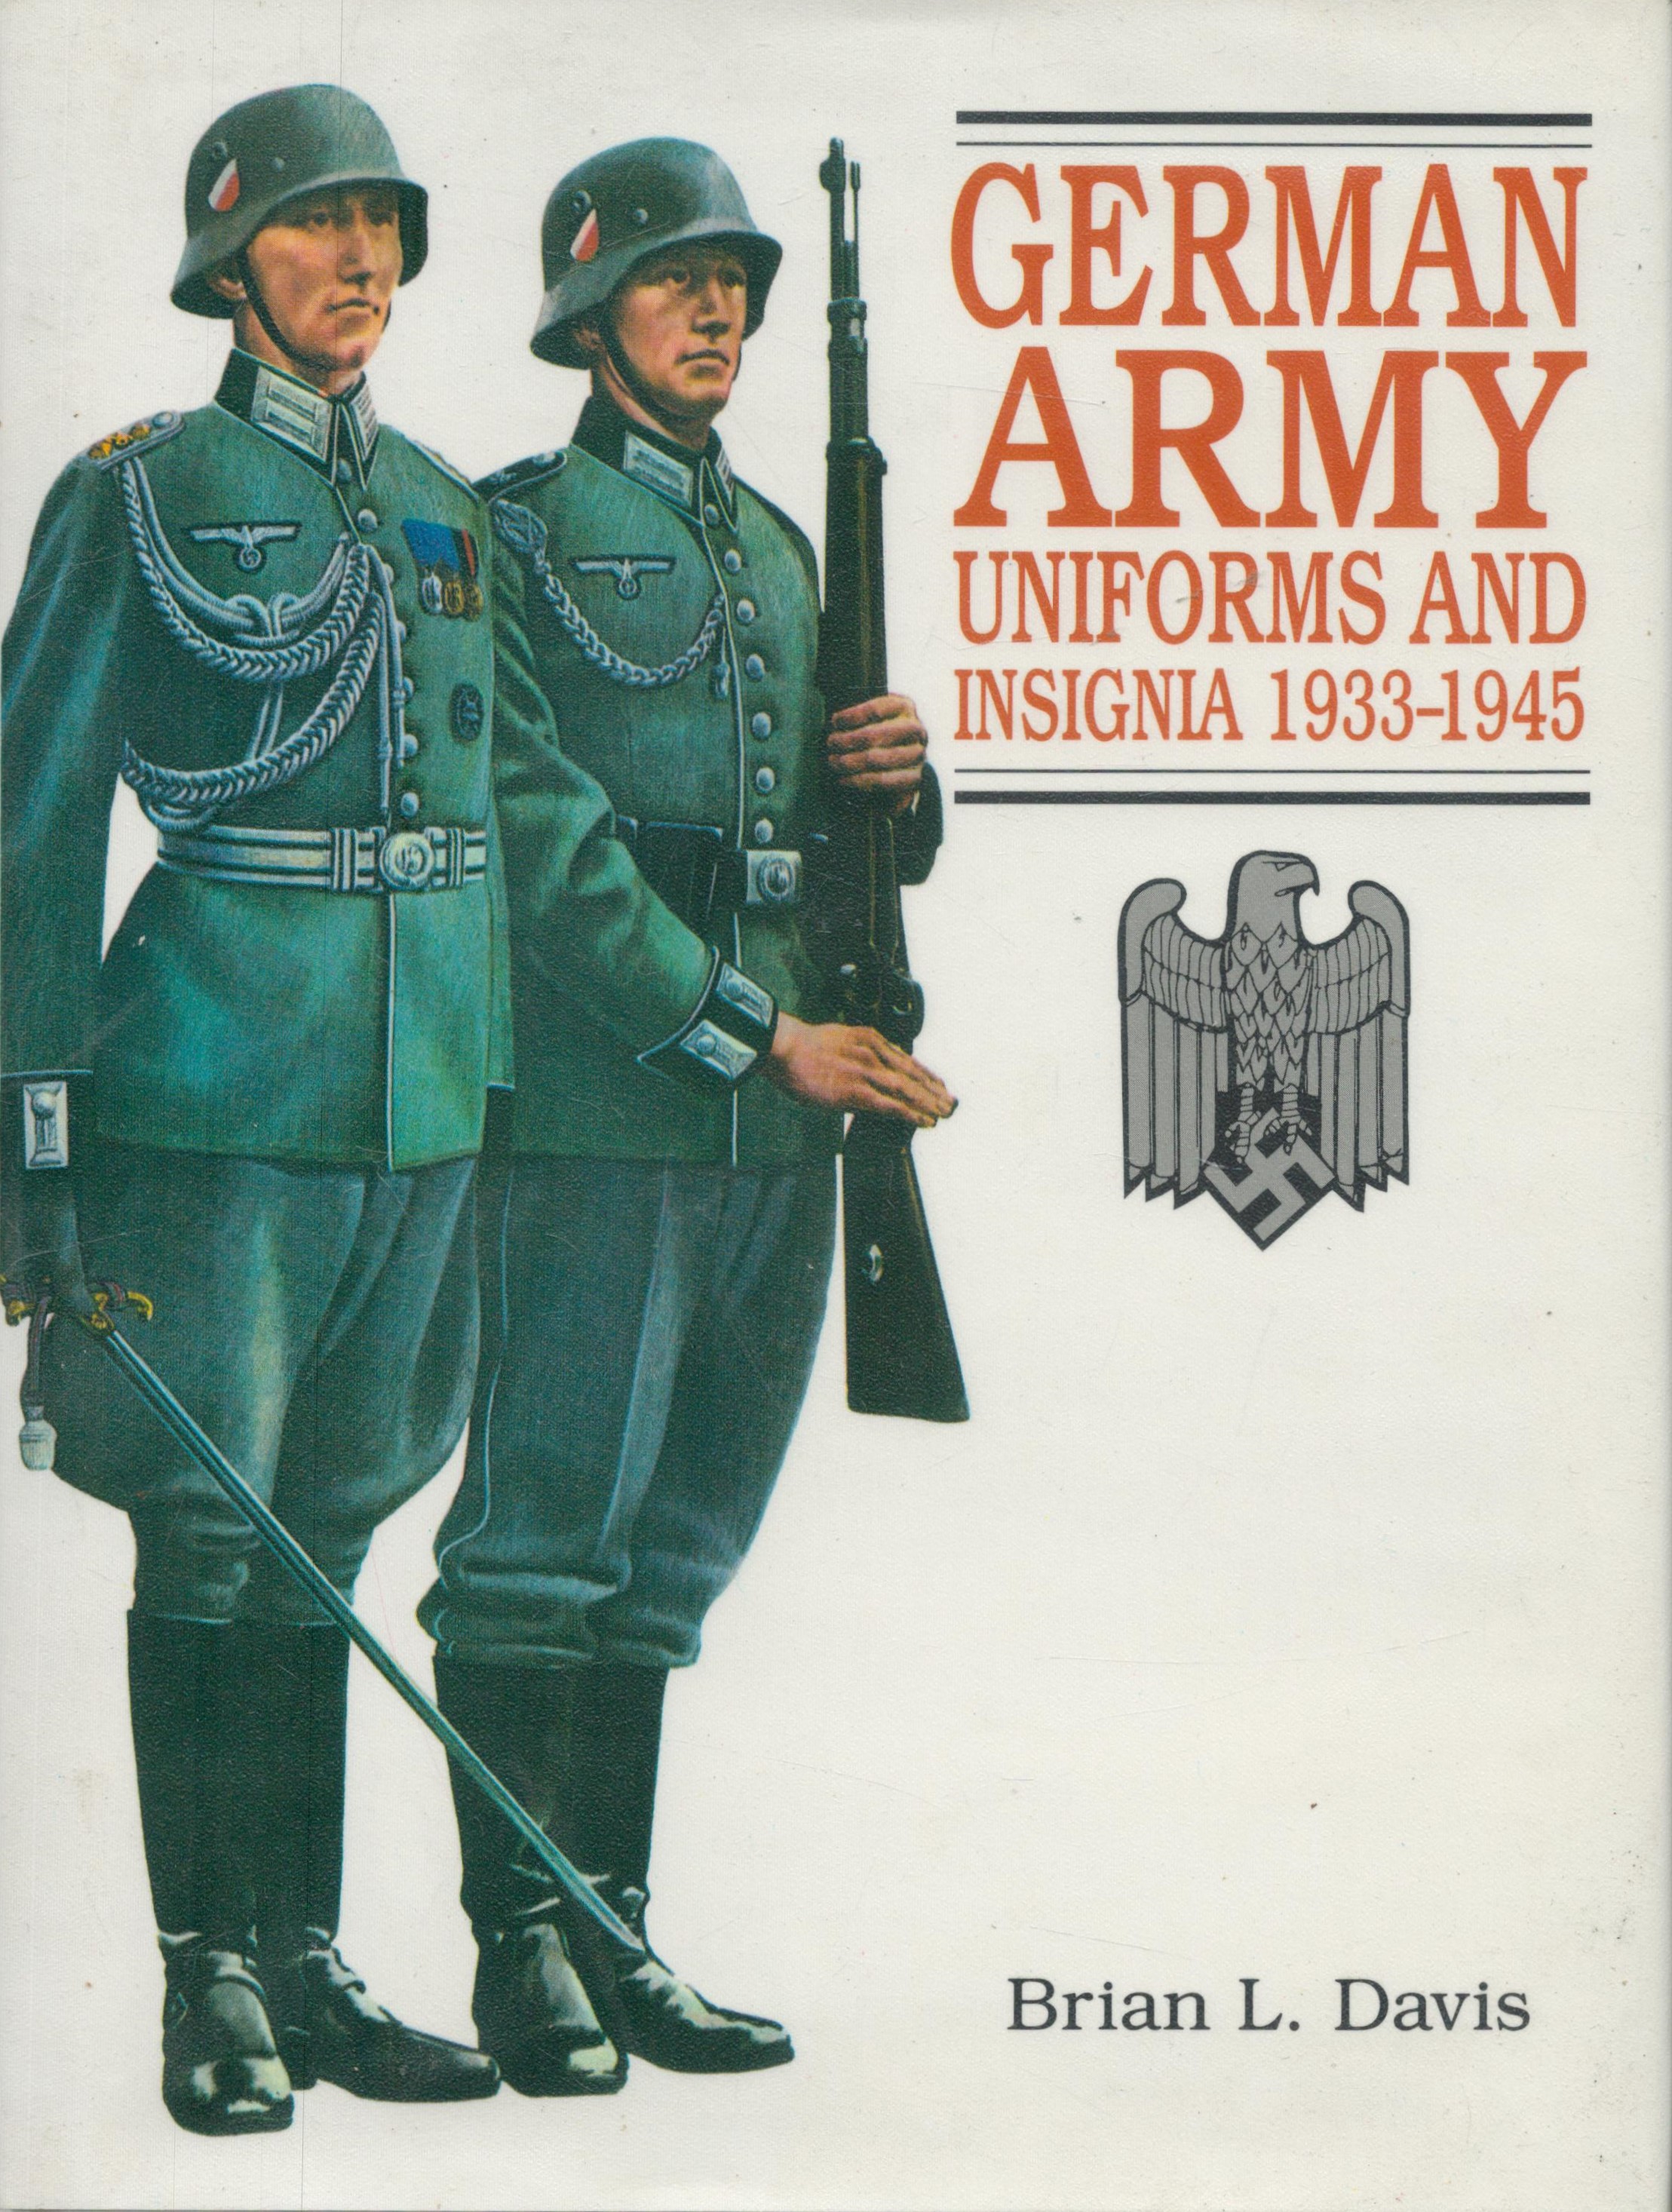 German Army Uniforms and Insignia 1933 1945 by Brian L Davis 1998 edition unknown Hardback Book with